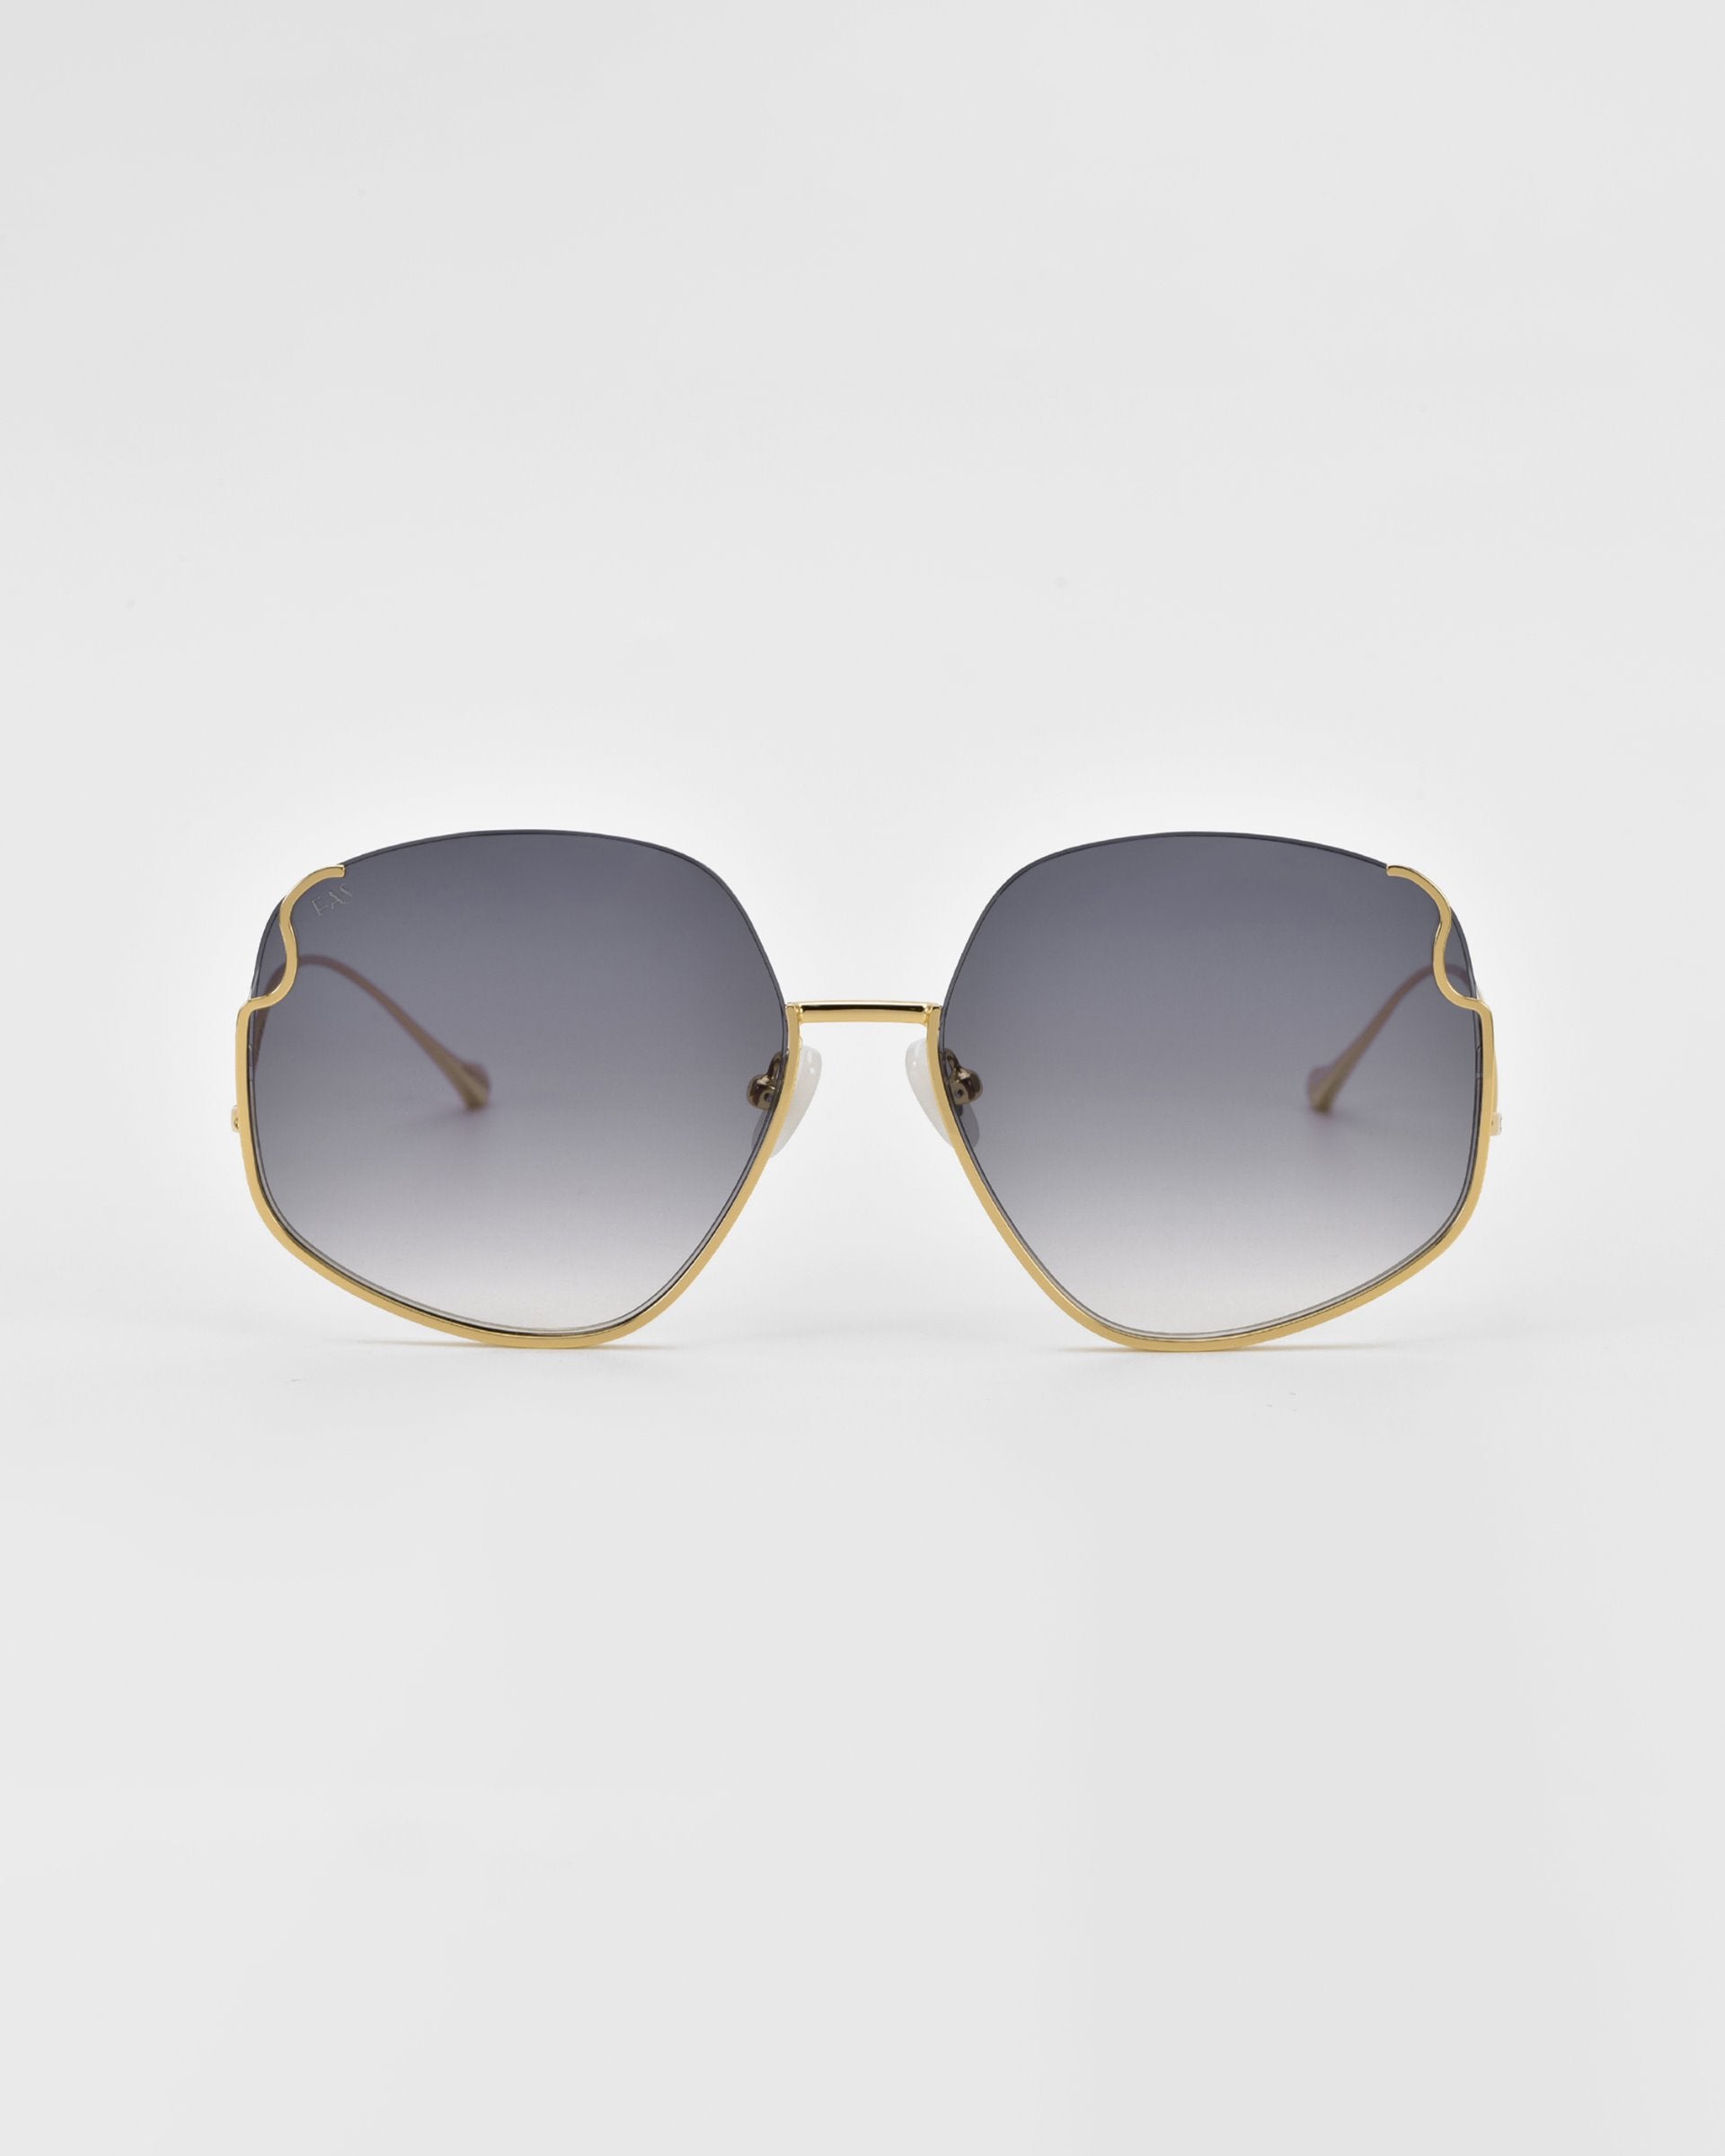 A pair of For Art's Sake® Drape sunglasses with large, hexagonal lenses featuring a gradient tint from dark grey to light grey. The sunglasses have a thin, gold metal frame with intricate metal detailing and delicate gold temples. The background is a plain, soft white.